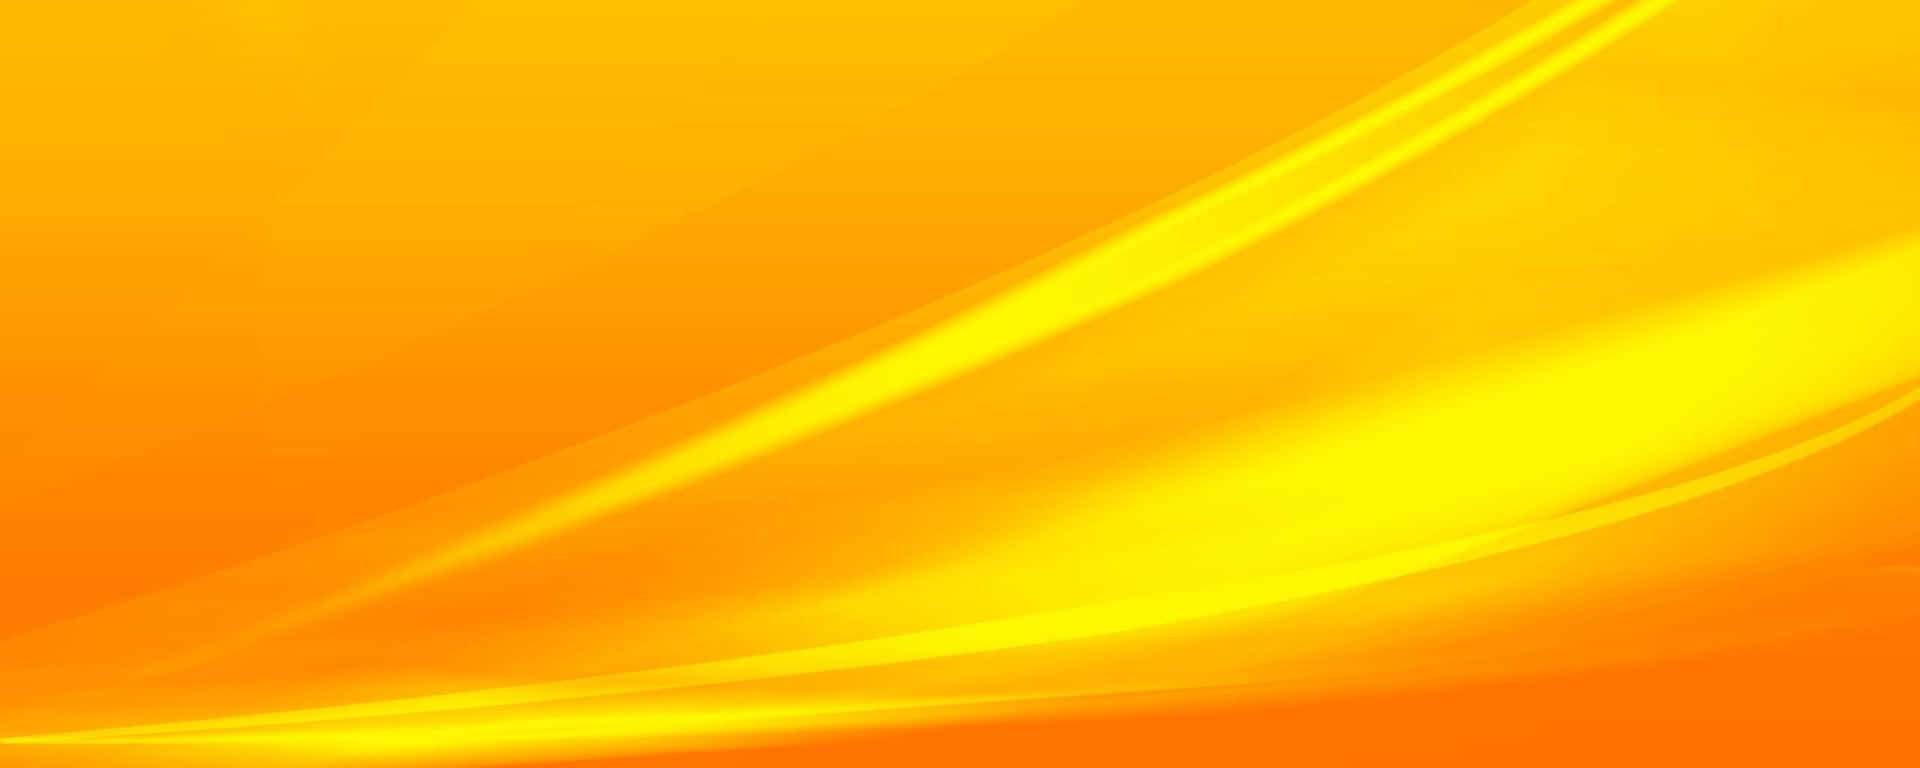 Yellow Abstract Explosion Art Wallpaper